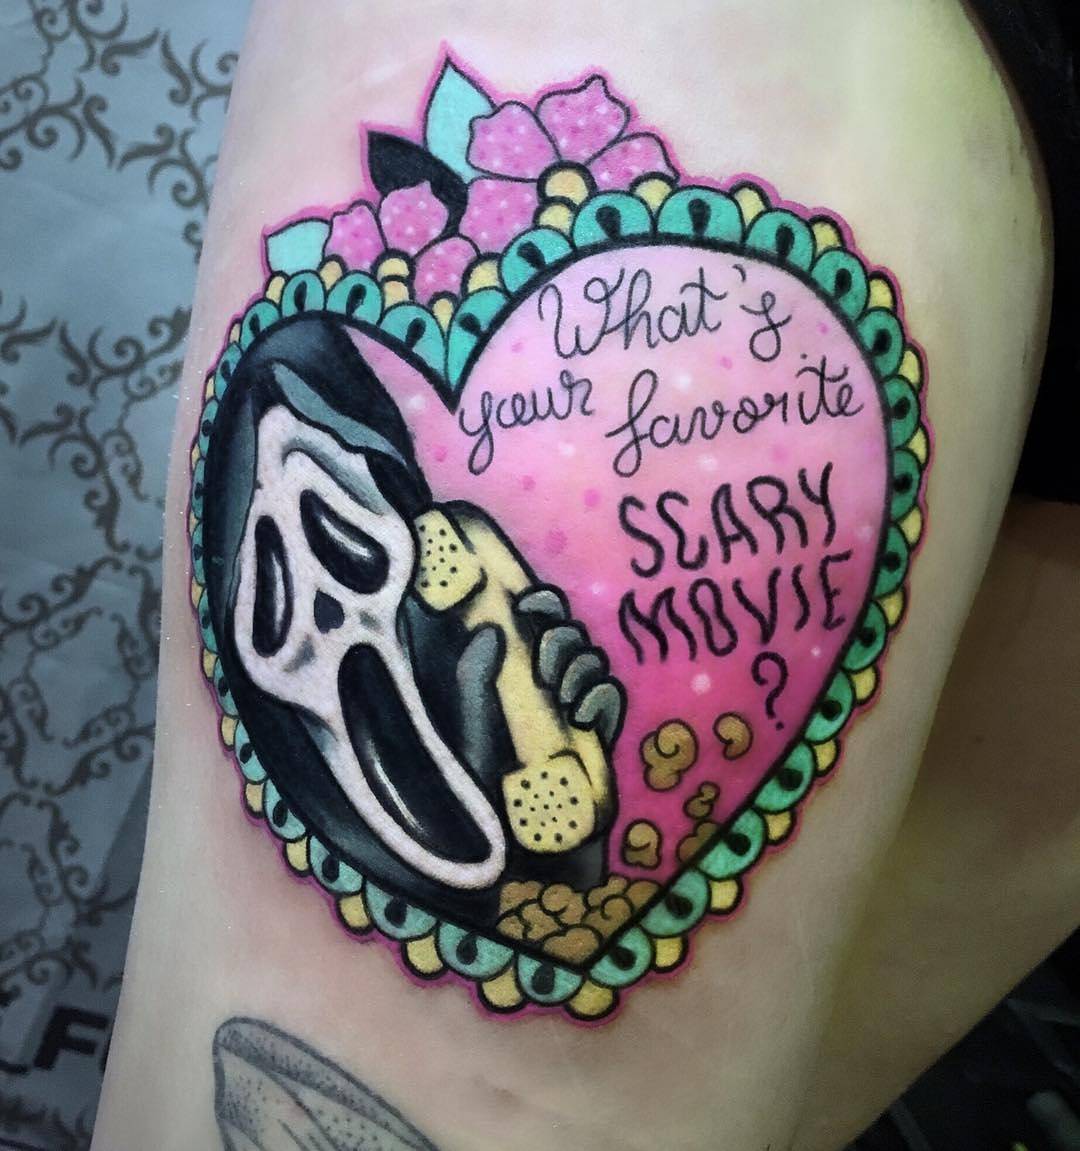 Horror Tattoos That Prove an Awesome Amount of Fandom  iHorror